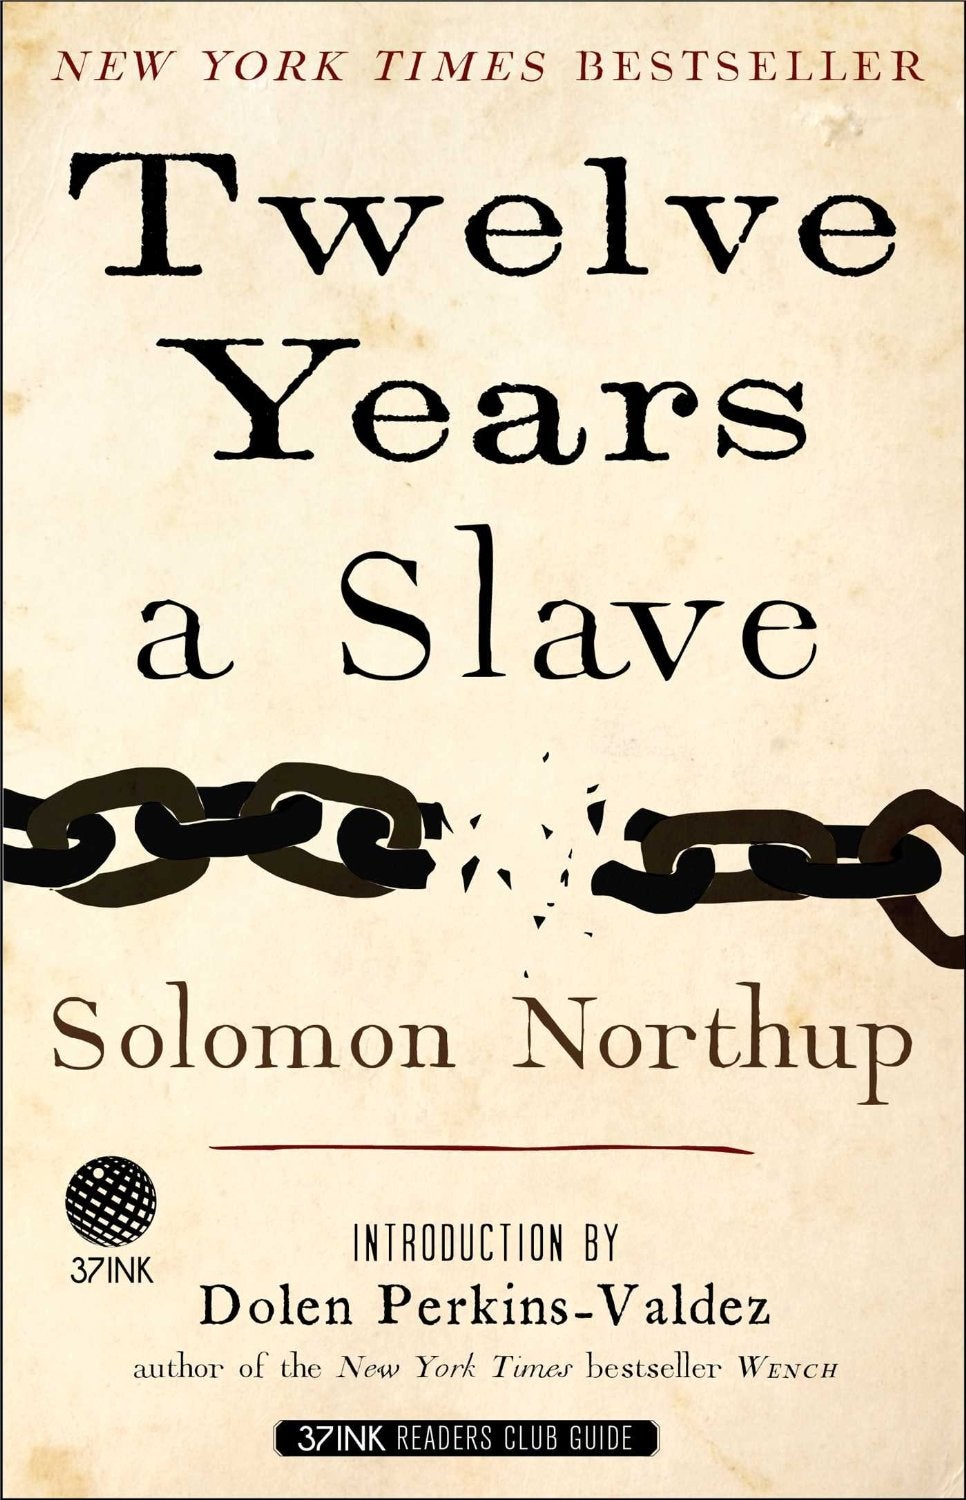 '12 Years a Slave' to be Taught in High Schools